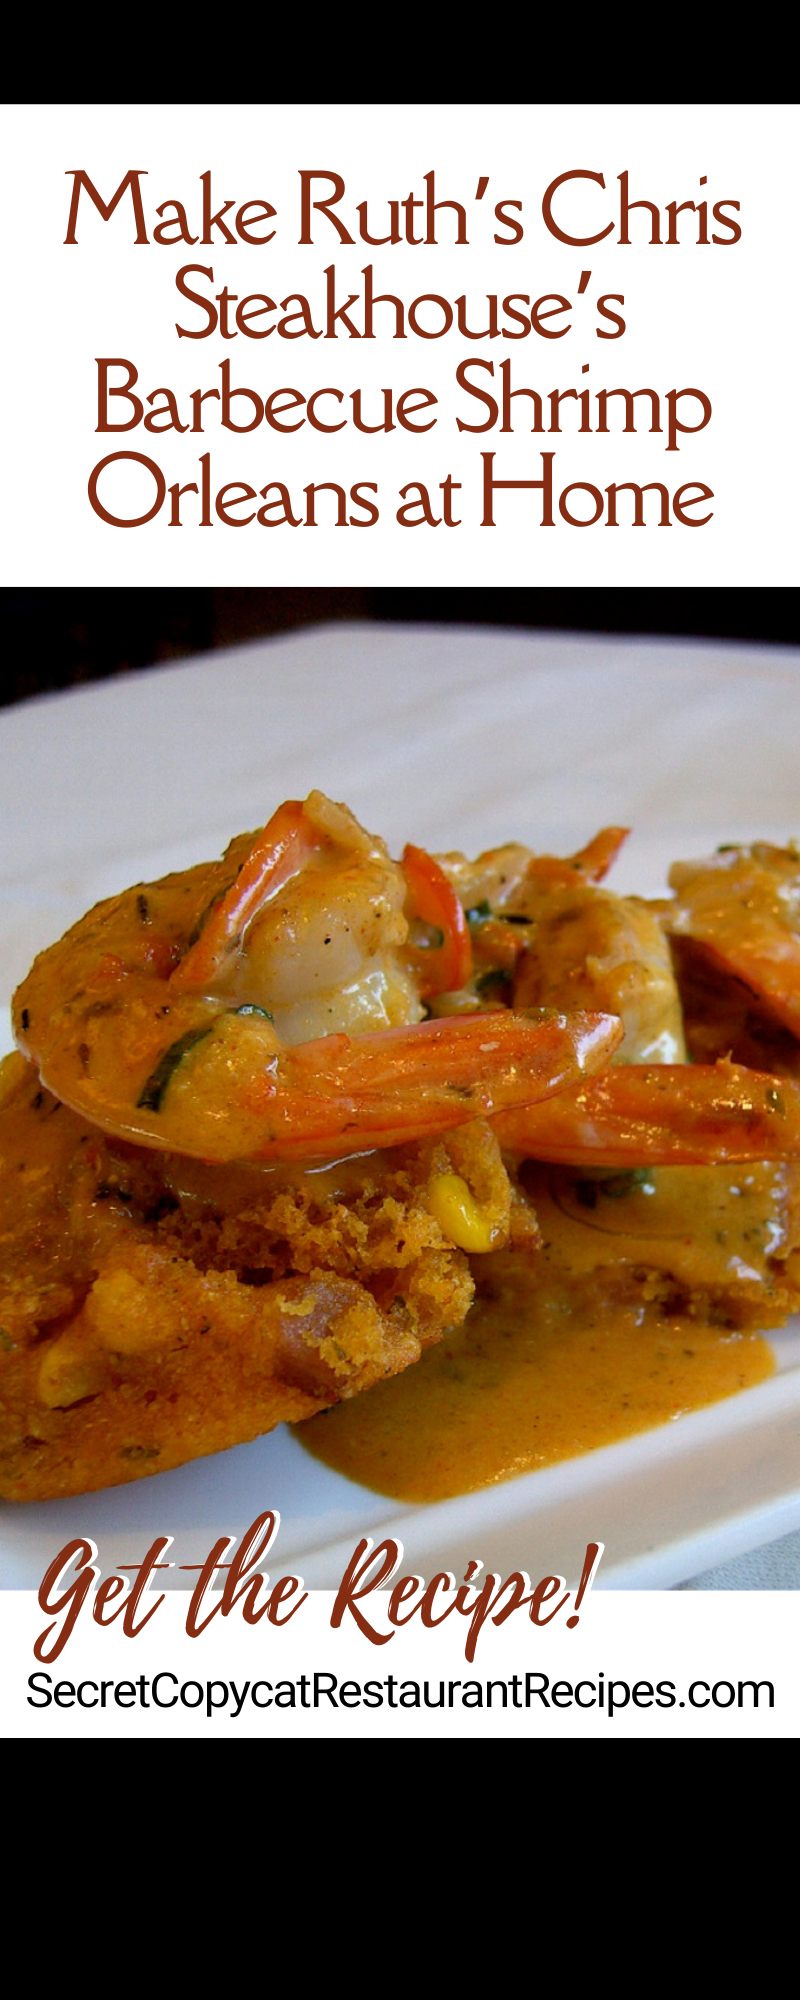 Ruth’s Chris Steakhouse Barbecue Shrimp Orleans Recipe